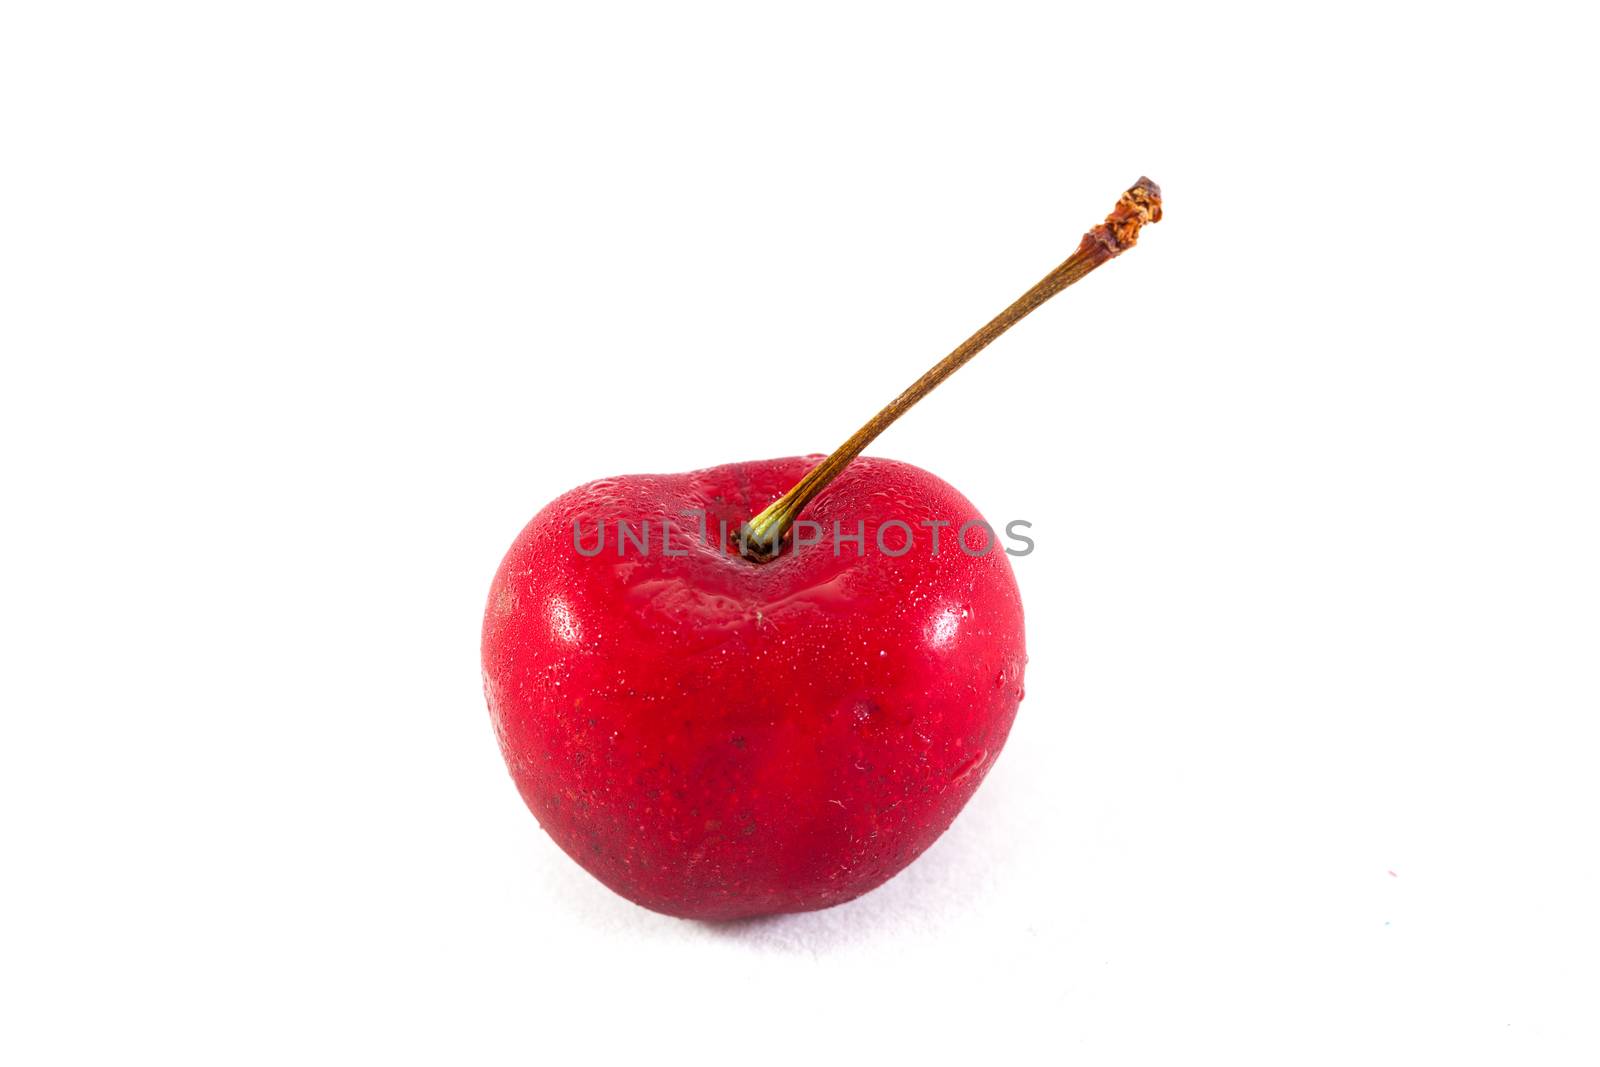 Cherry on a white background. The Cherry red on a white background in the studio. Cut deployed.